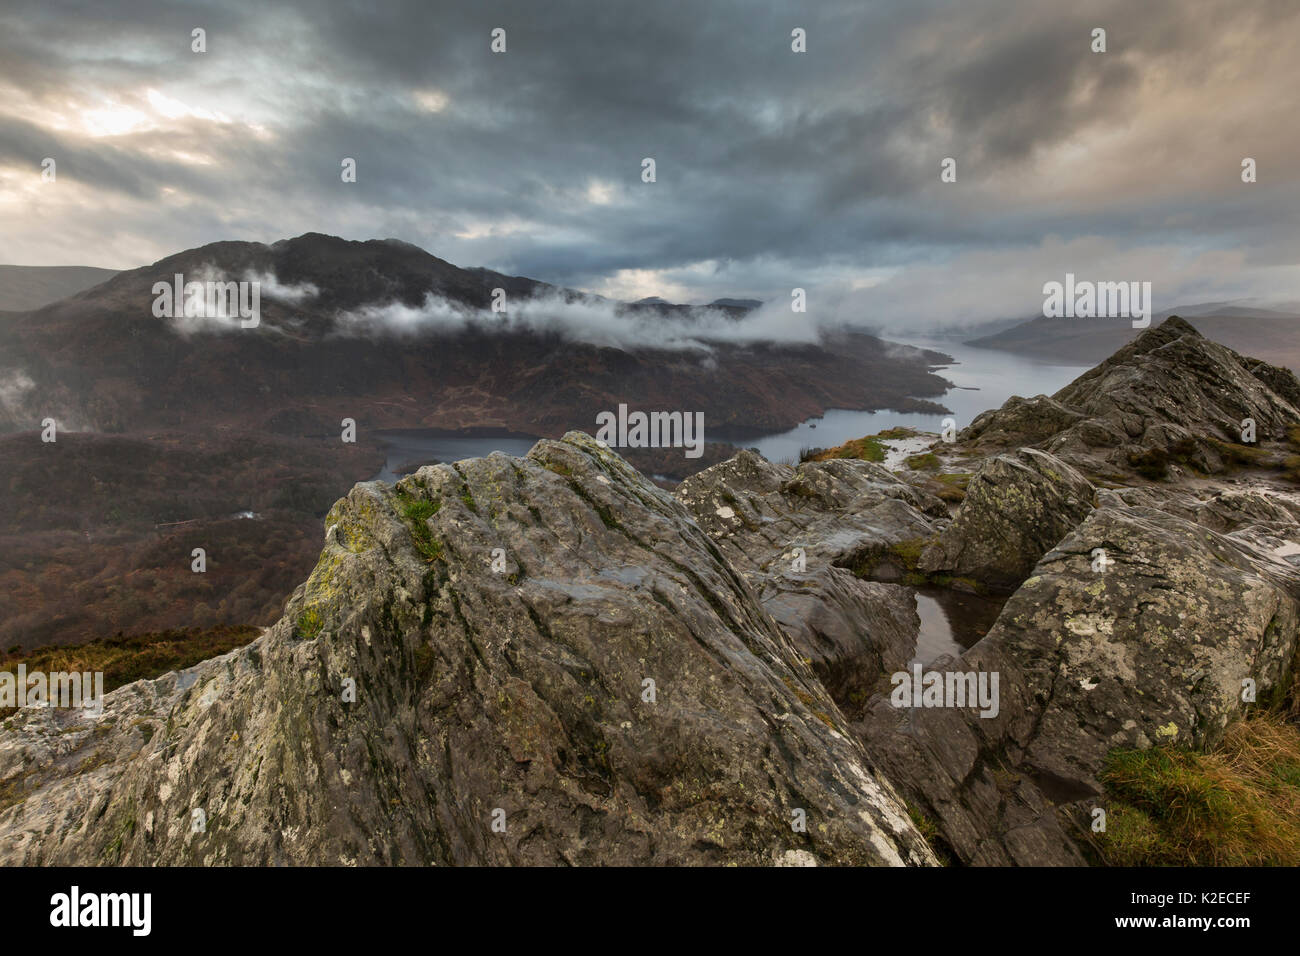 View from Ben A'an looking over Loch Katrine, Loch Lommond & Trossachs National Park, Scotland, UK, November 2015. Stock Photo